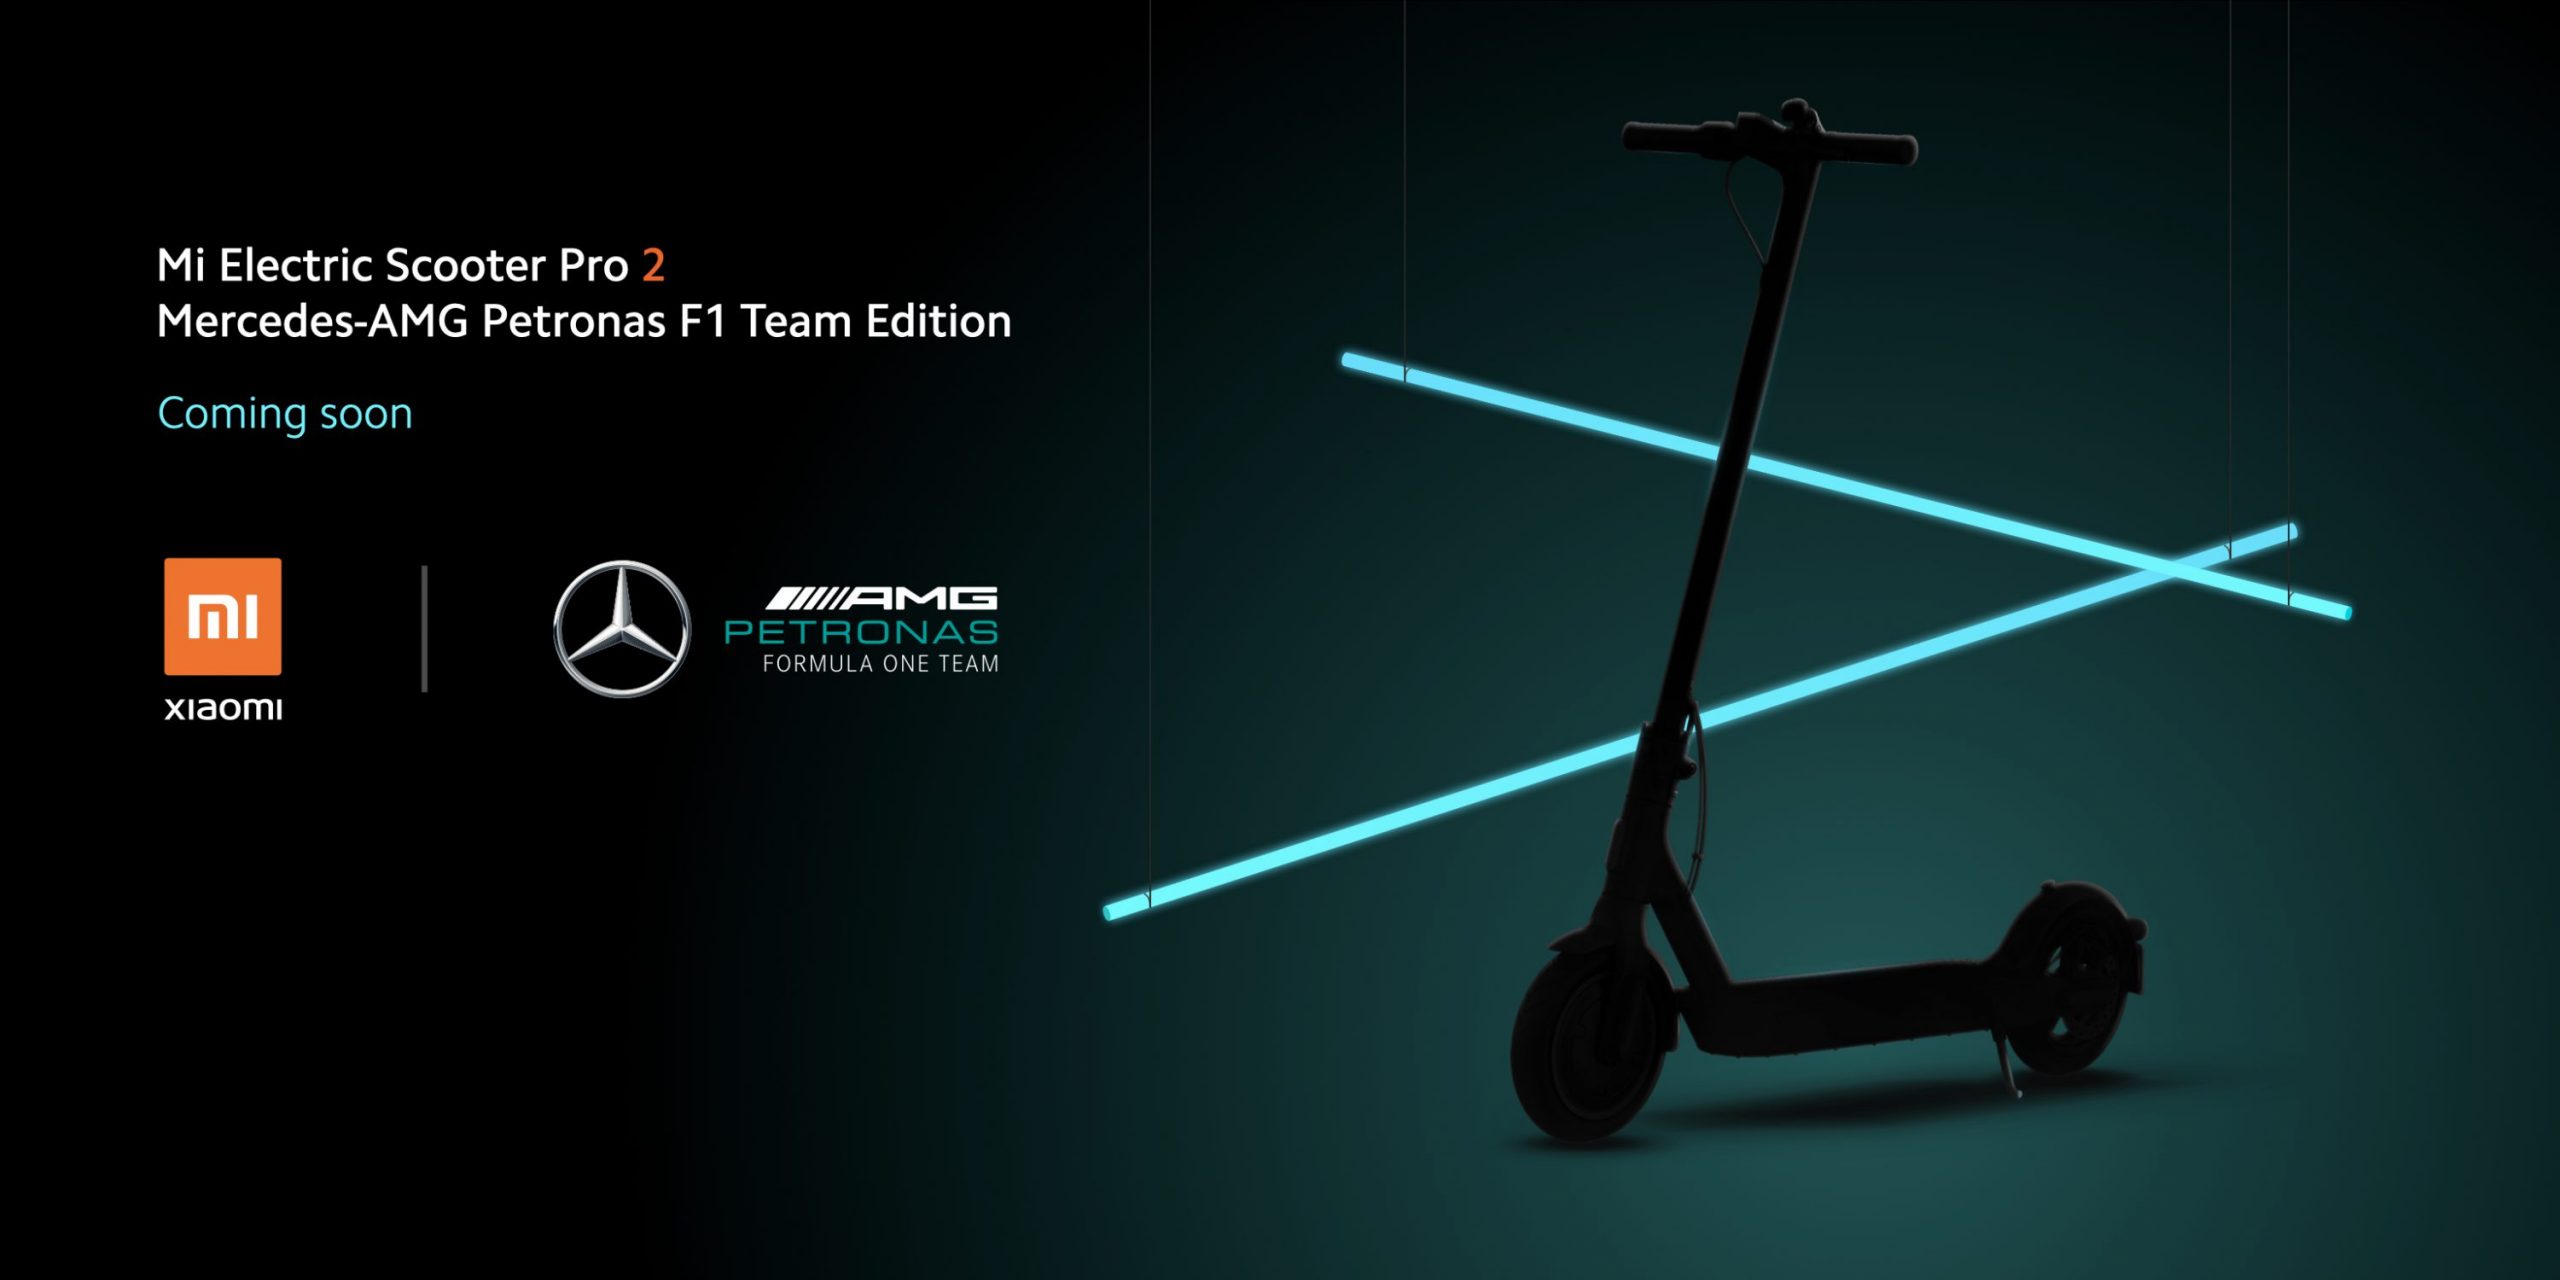 Xiaomi x Mercedes-AMG Petronas F1 Electric Scooter Pro 2